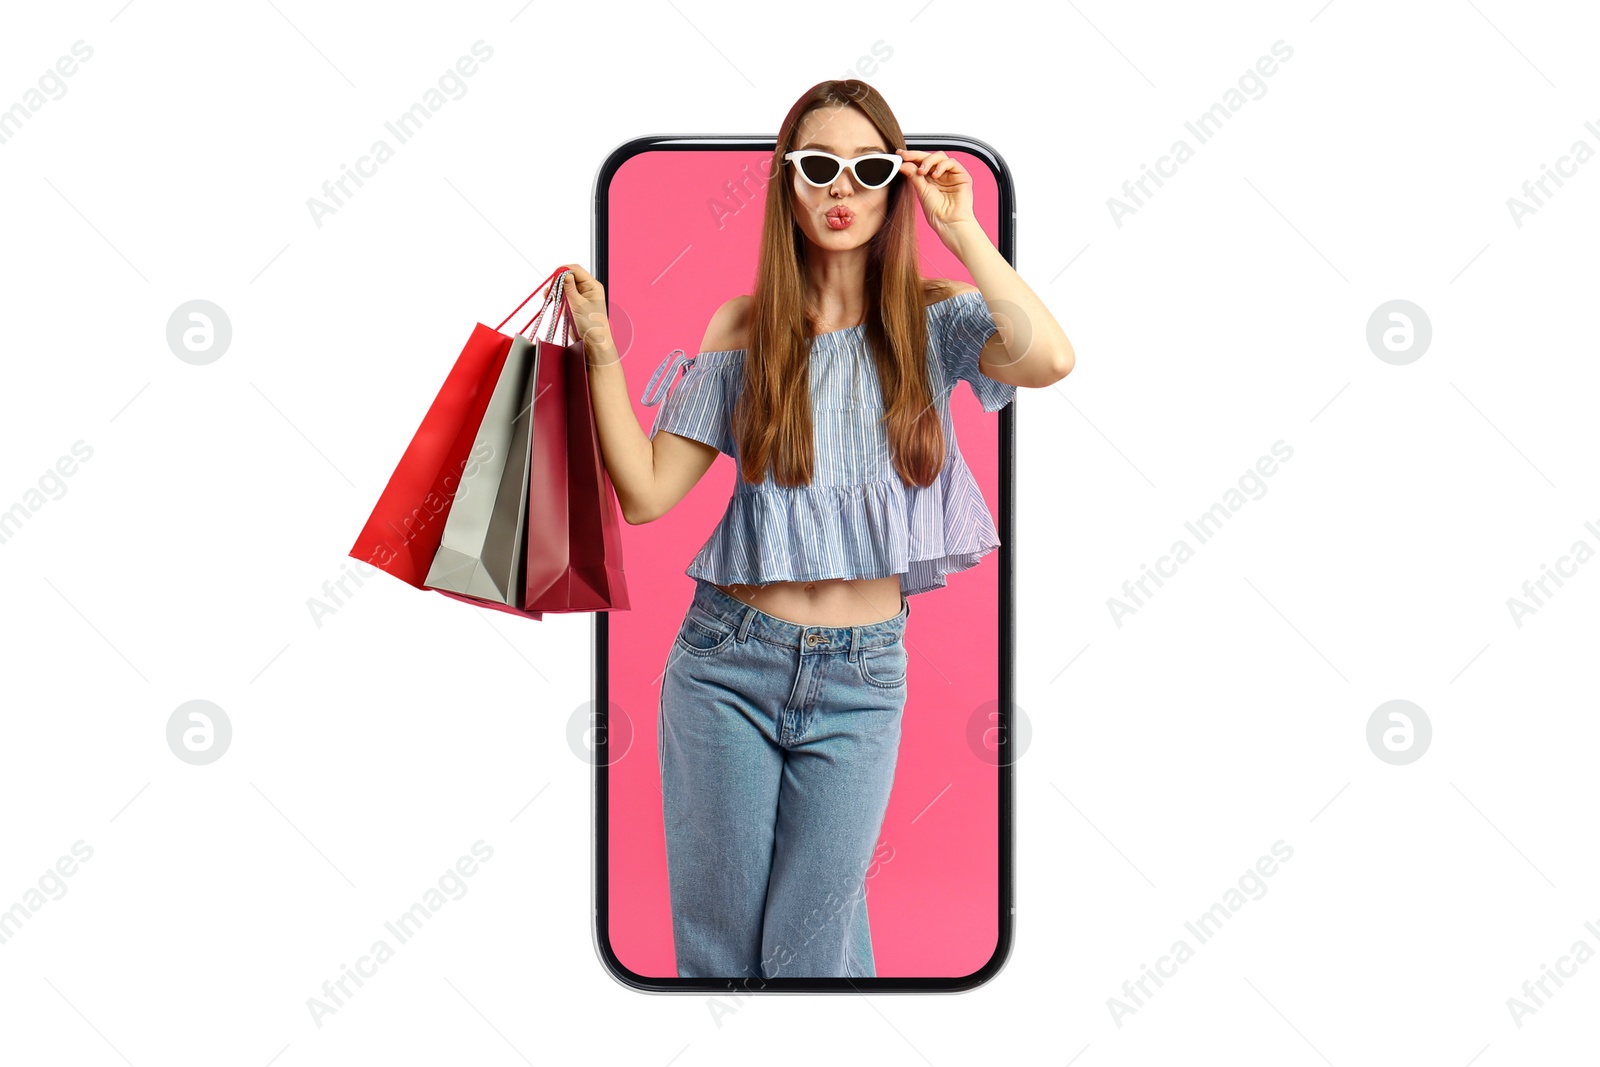 Image of Online shopping. Stylish woman with paper bags looking out from smartphone on white background